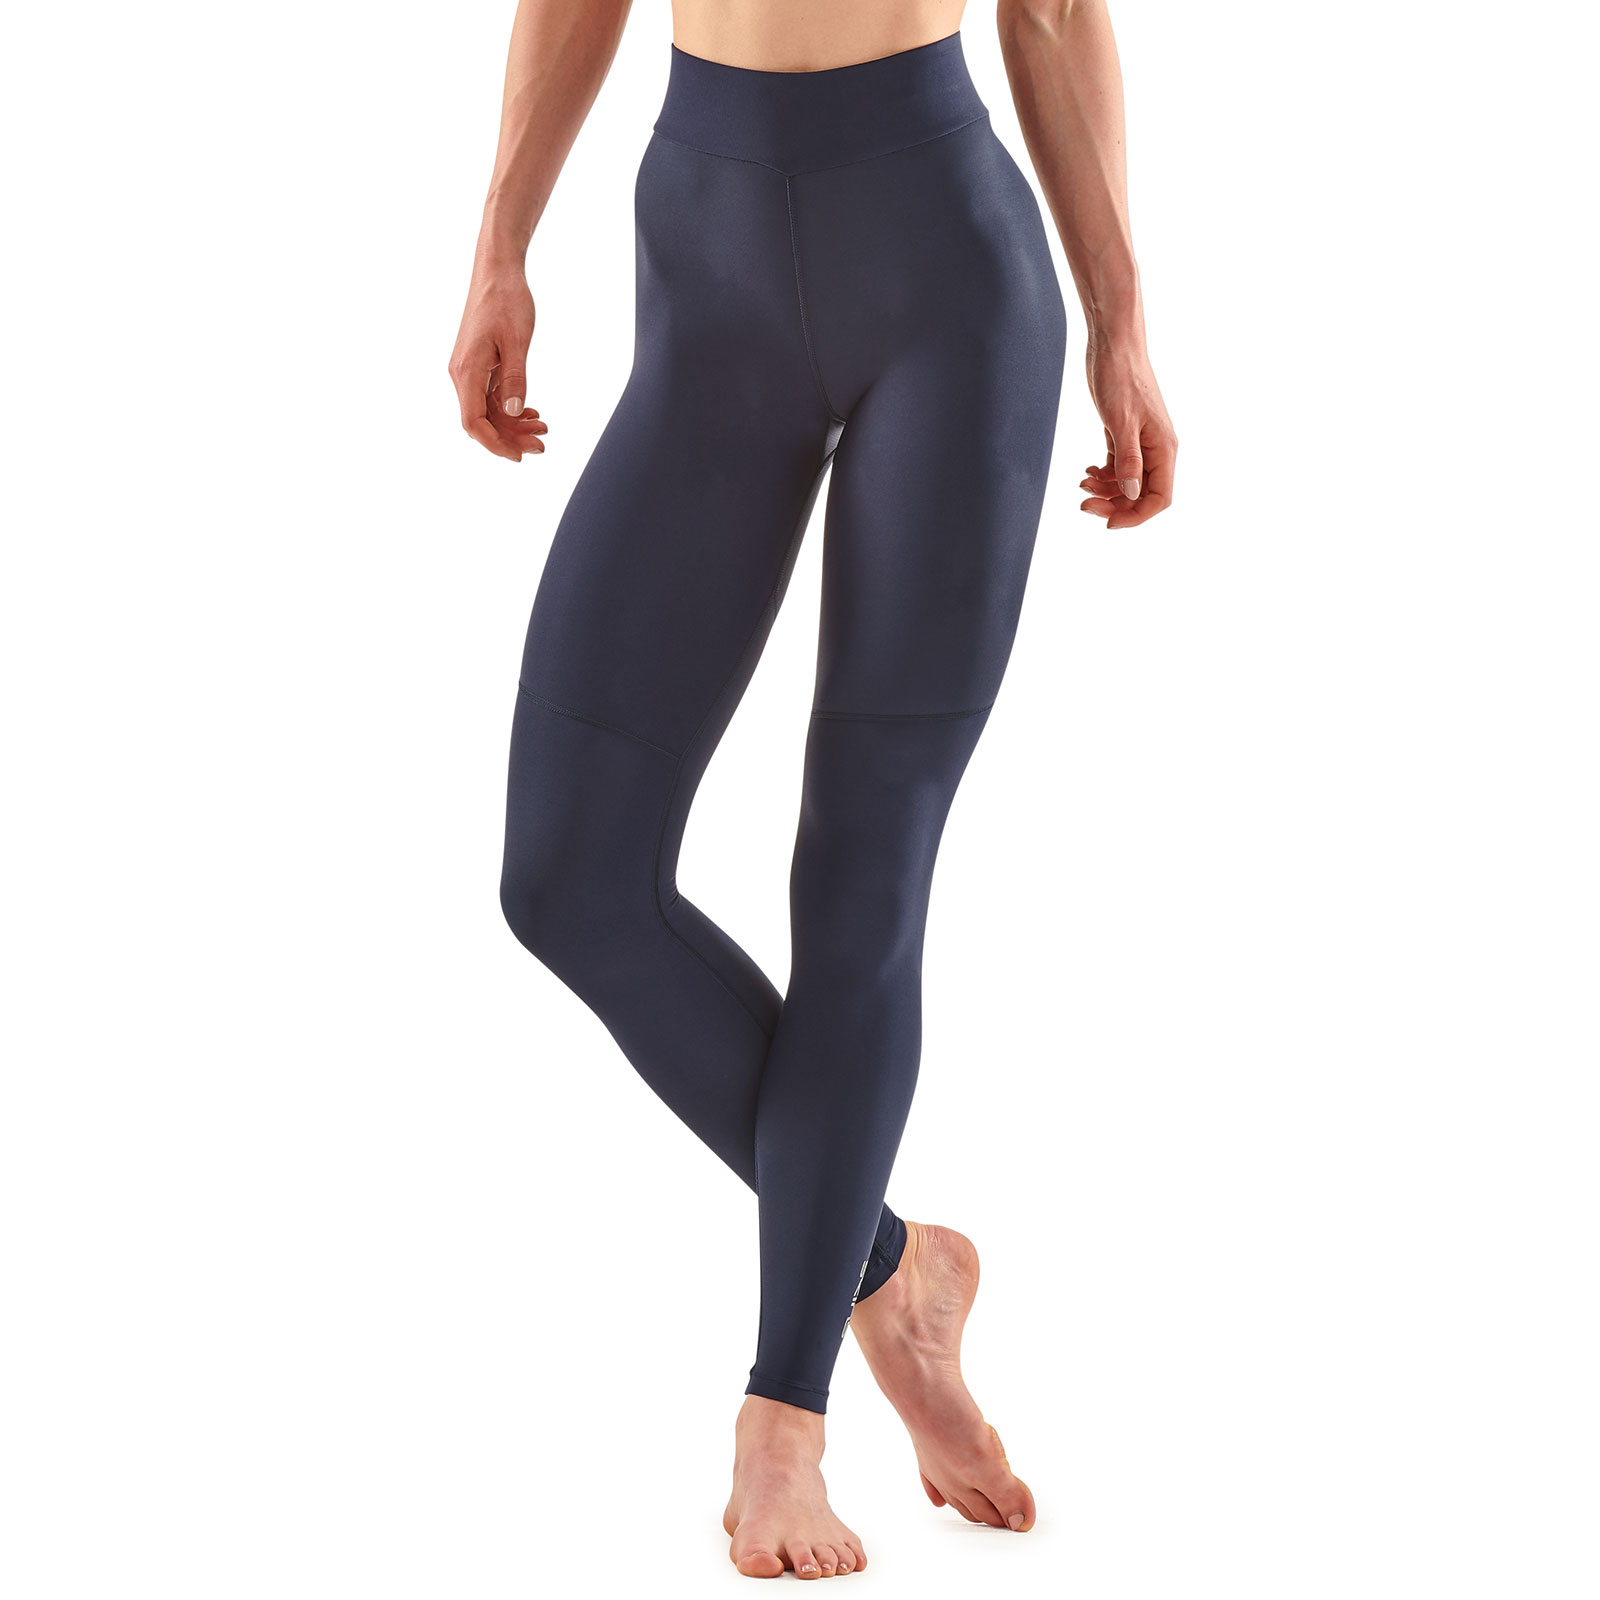 SKINS SERIES-2 Women's Long Tights Navy Blue – Skins Compression